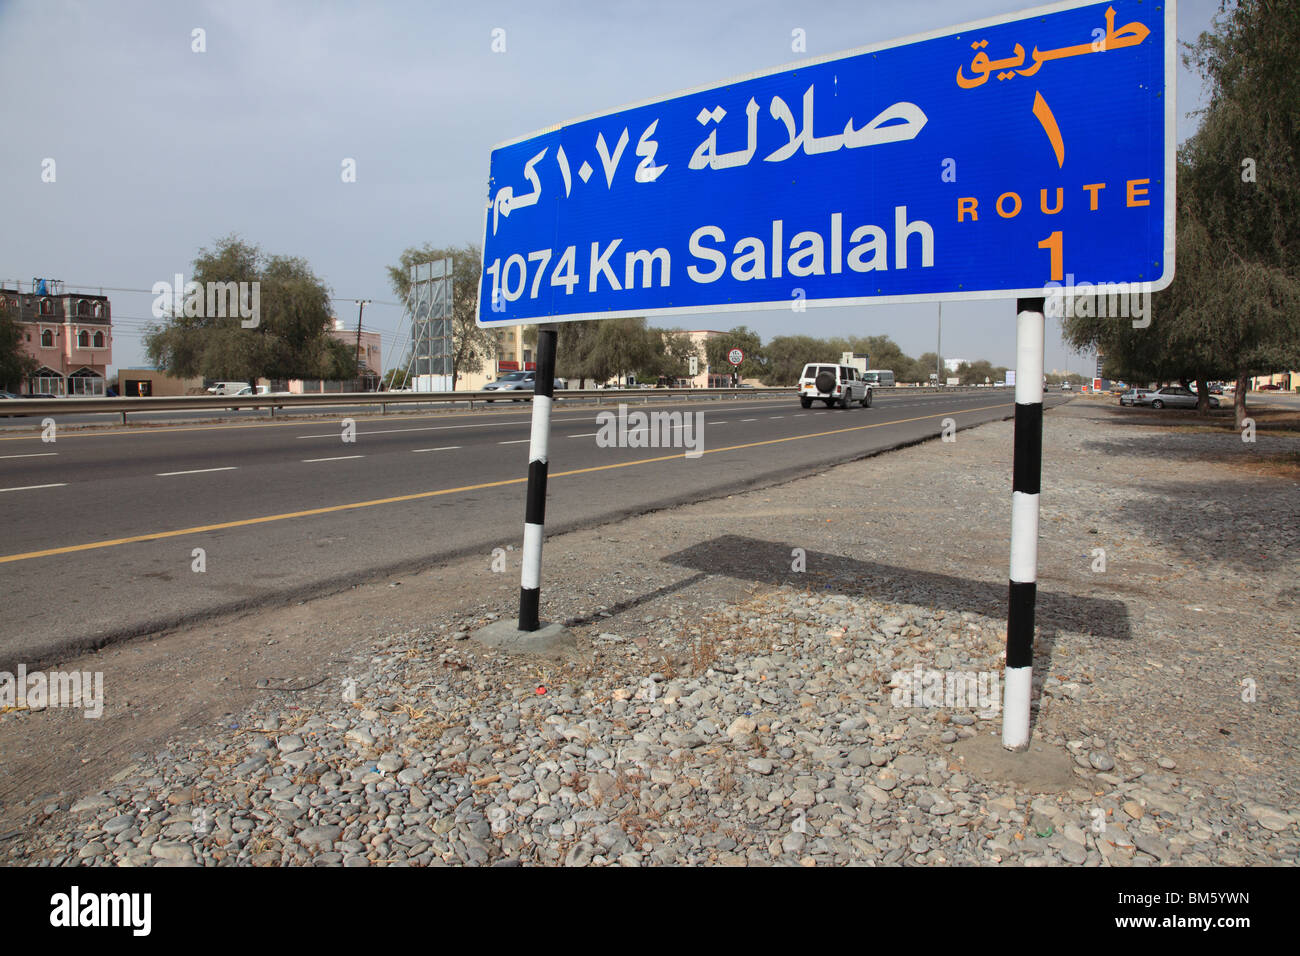 bilingual street direction sign, highway route No1 near Muscat showing 1074 km distance to Salalah,Oman.Photo by Willy Matheisl Stock Photo